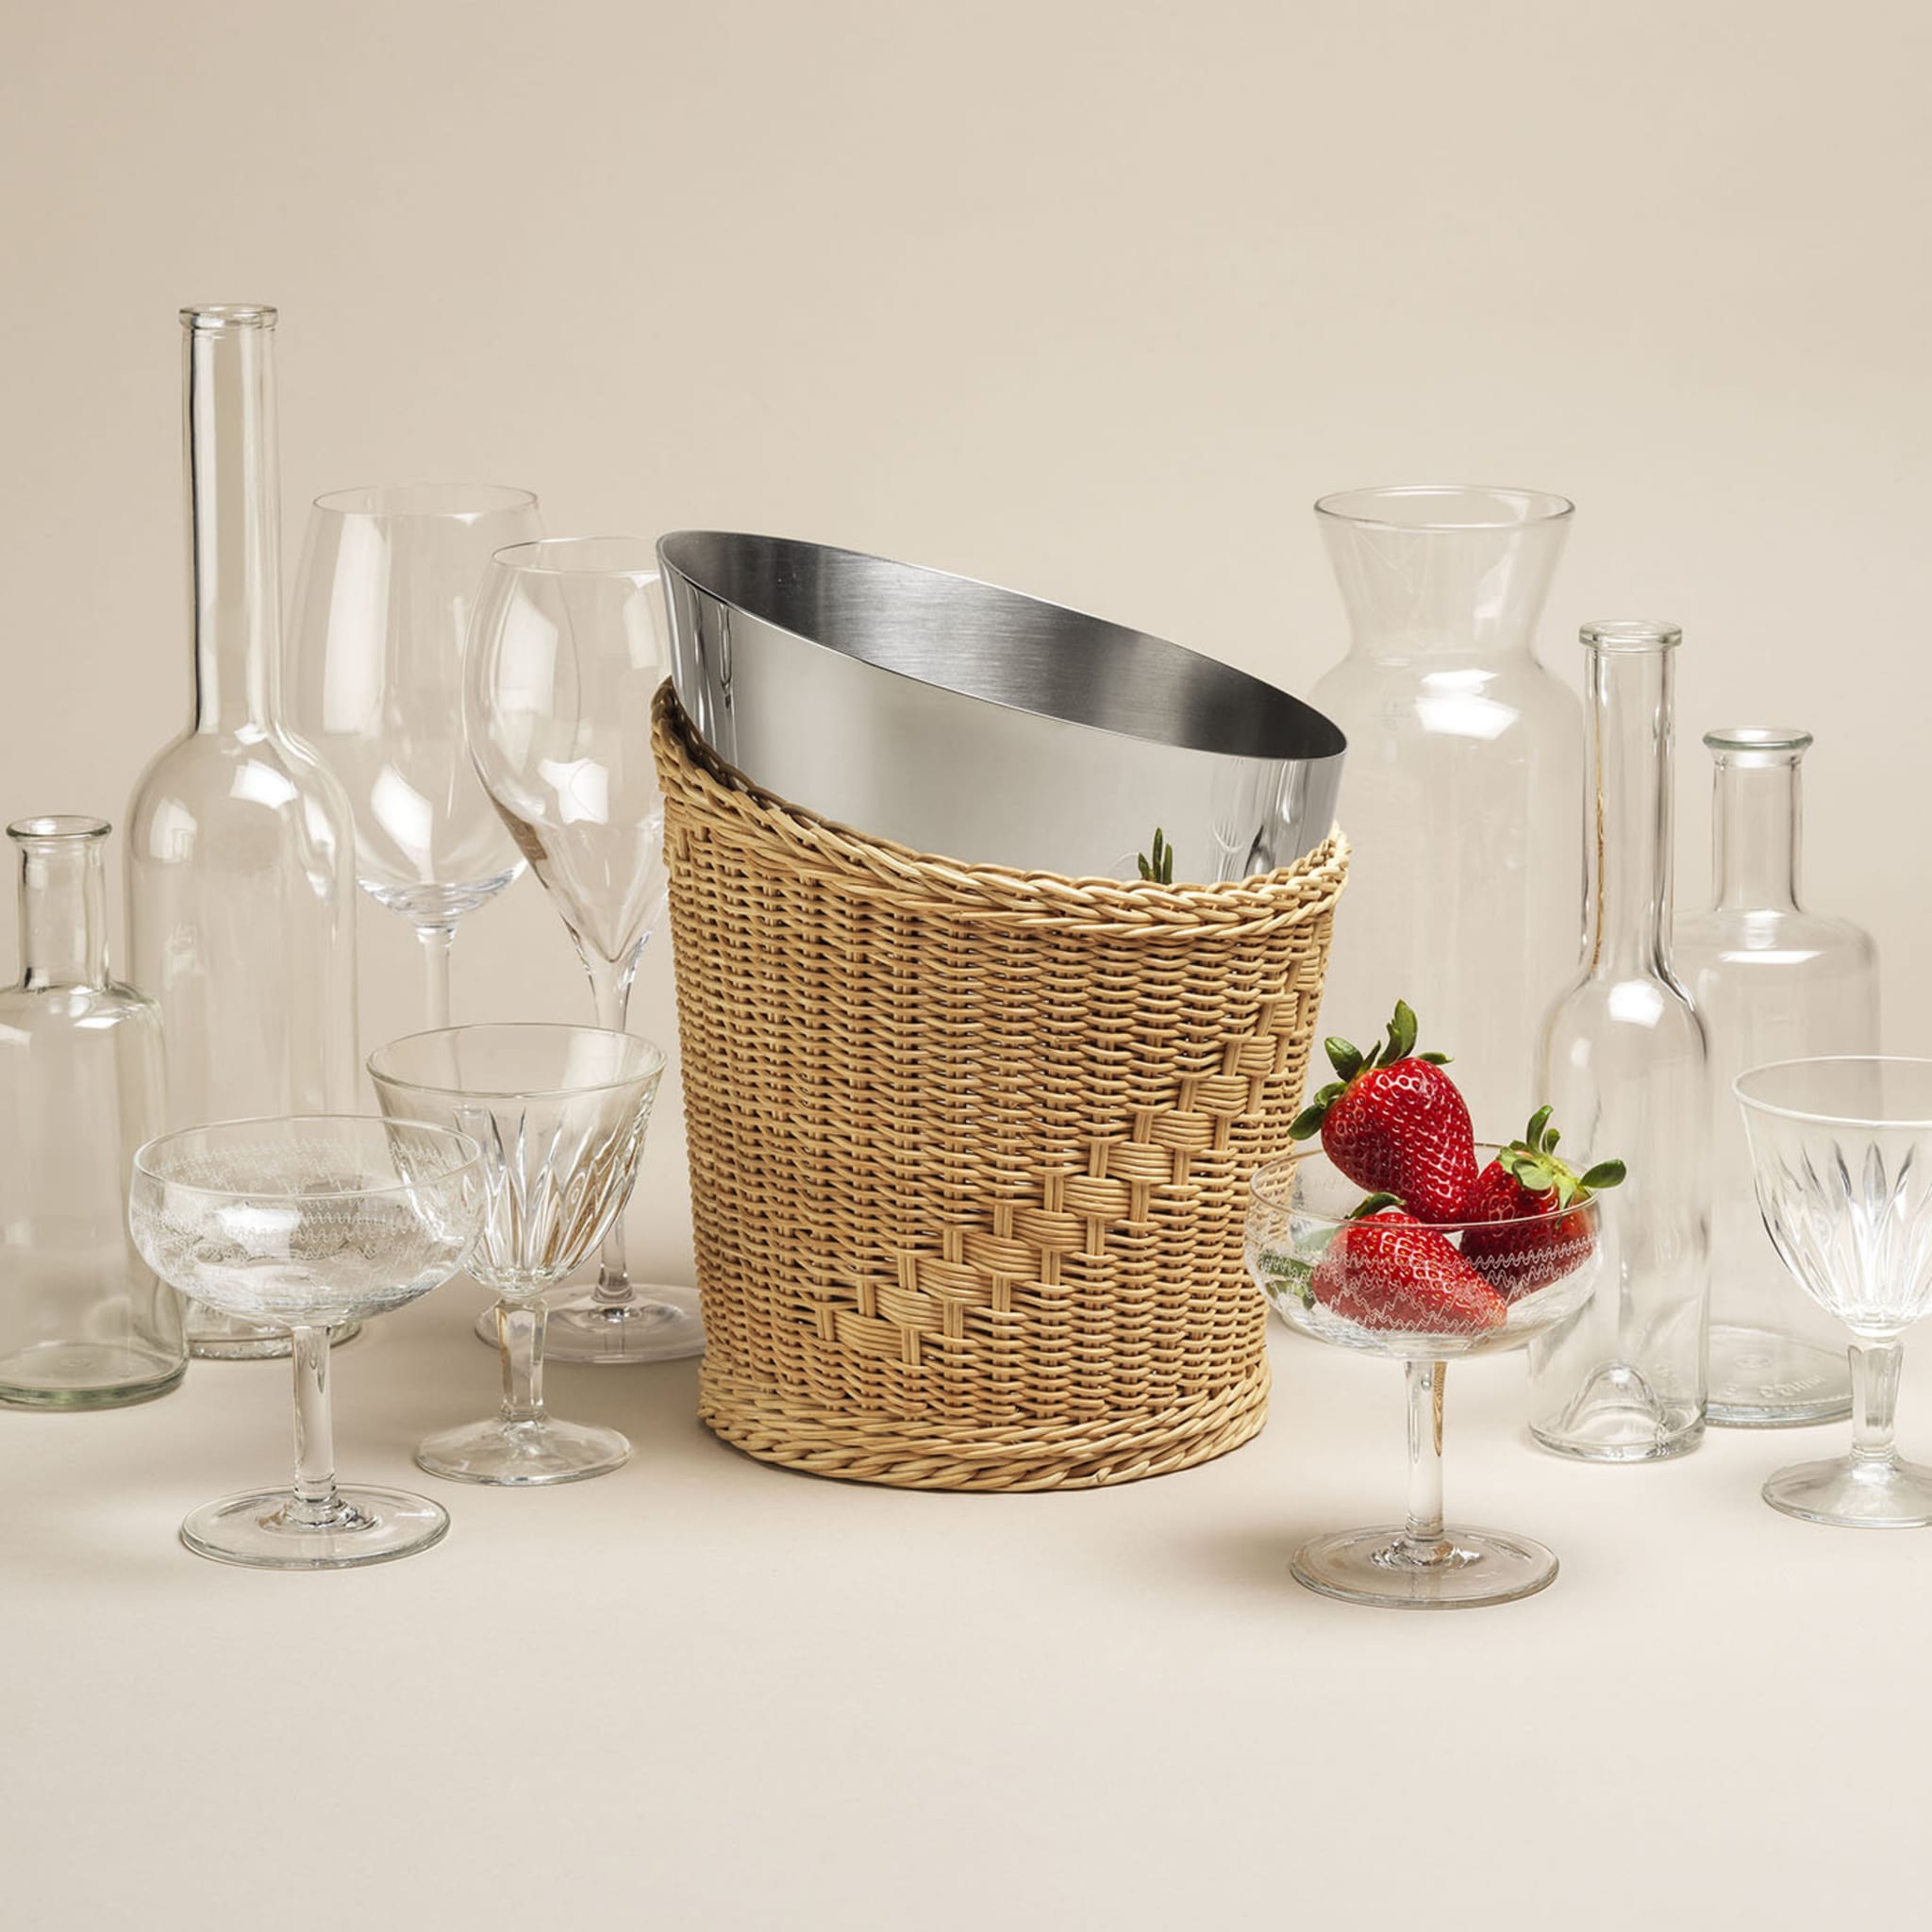 Orchidea Wicker Basket with Stainless Steel Champagne Bucket - Alternative view 1